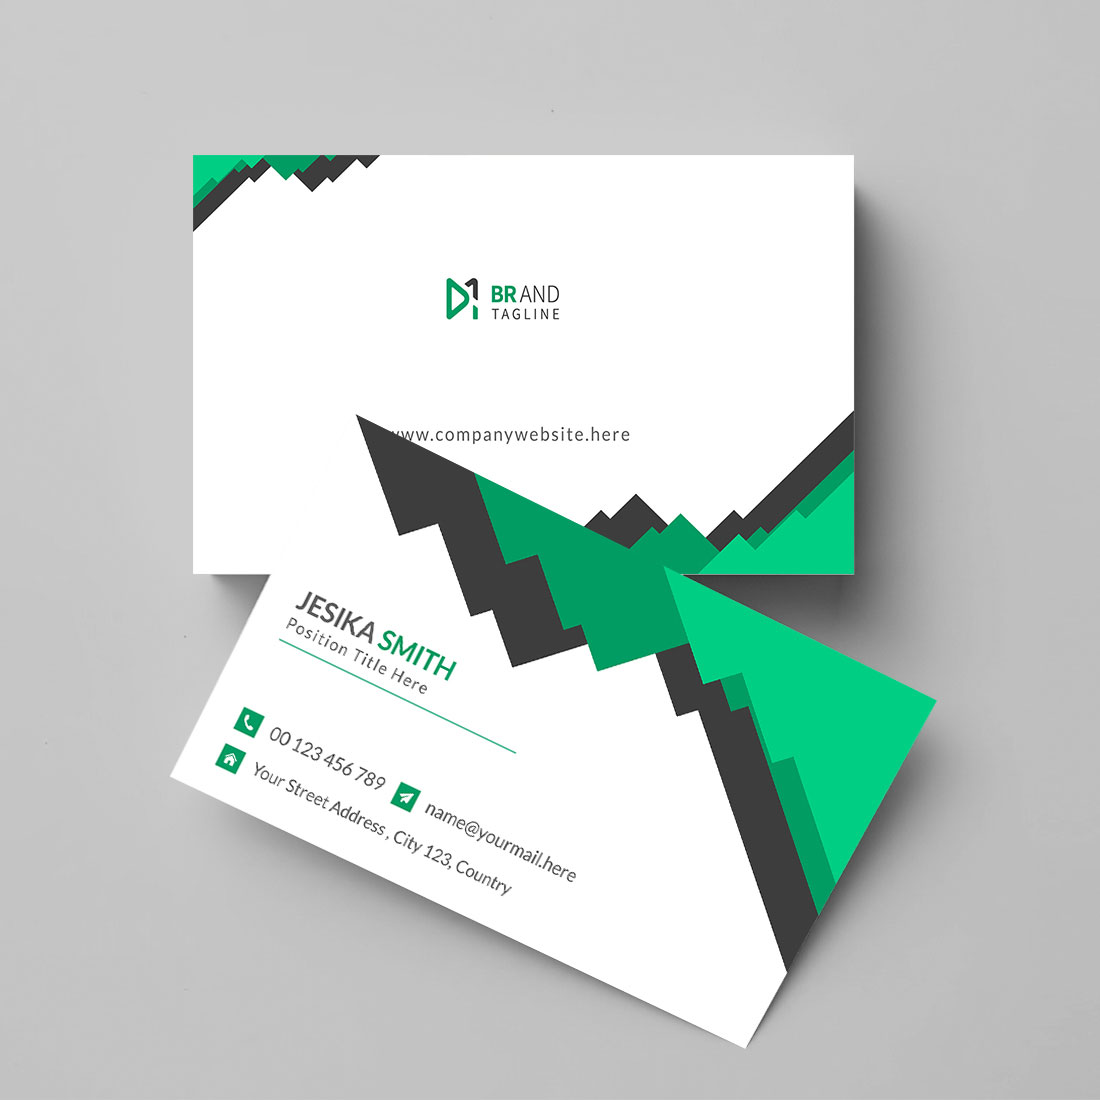 Minimal business card design template preview image.